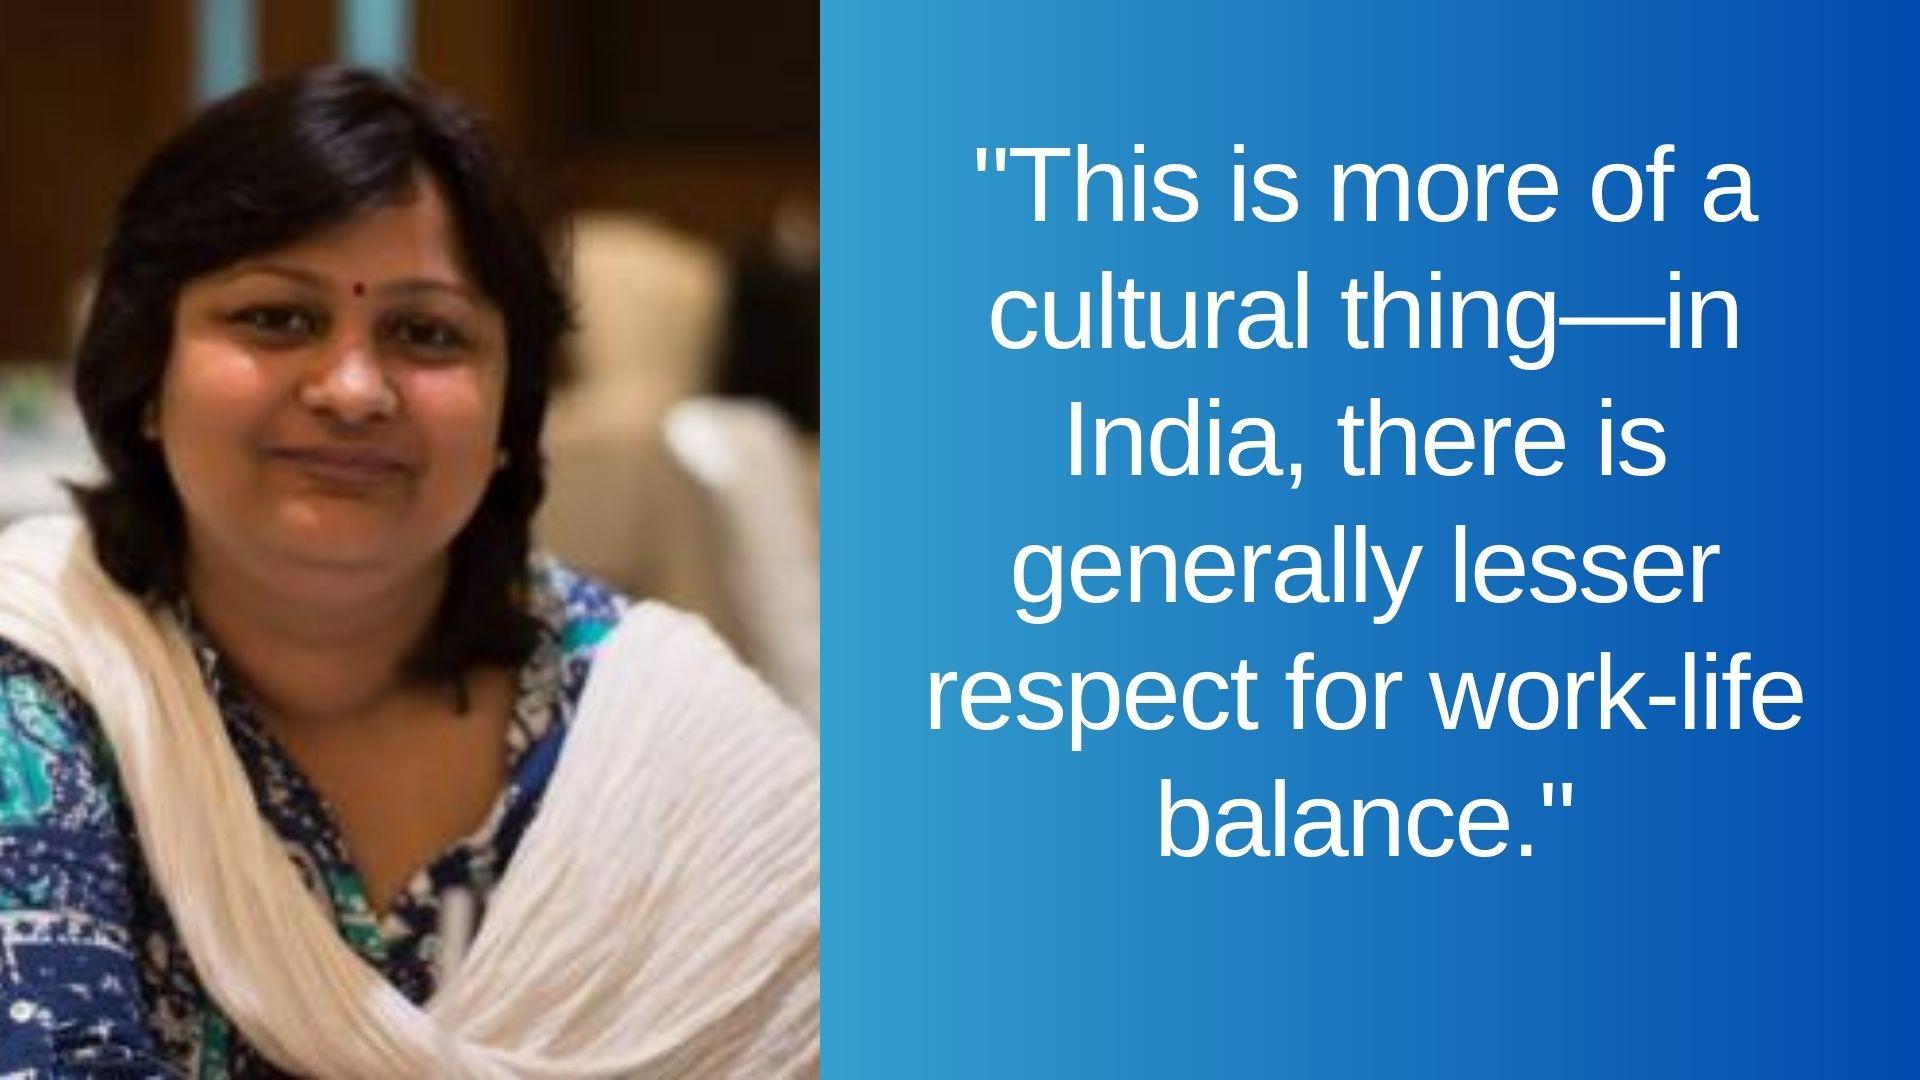 In India, there is generally lesser respect for work-life balance